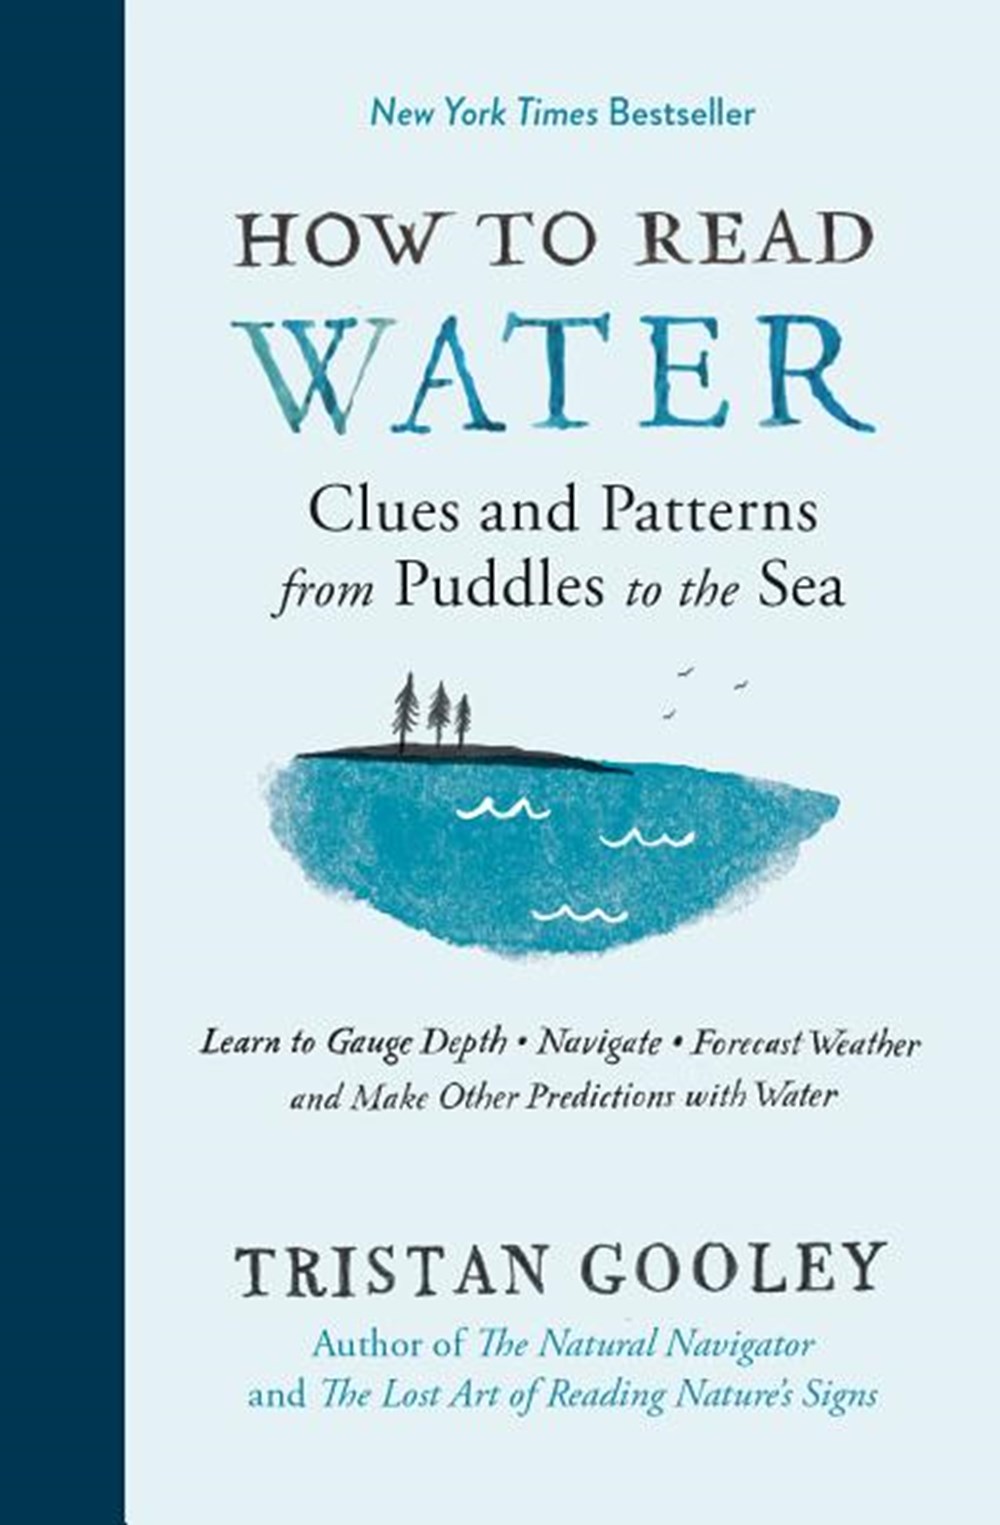 How to Read Water Clues and Patterns from Puddles to the Sea